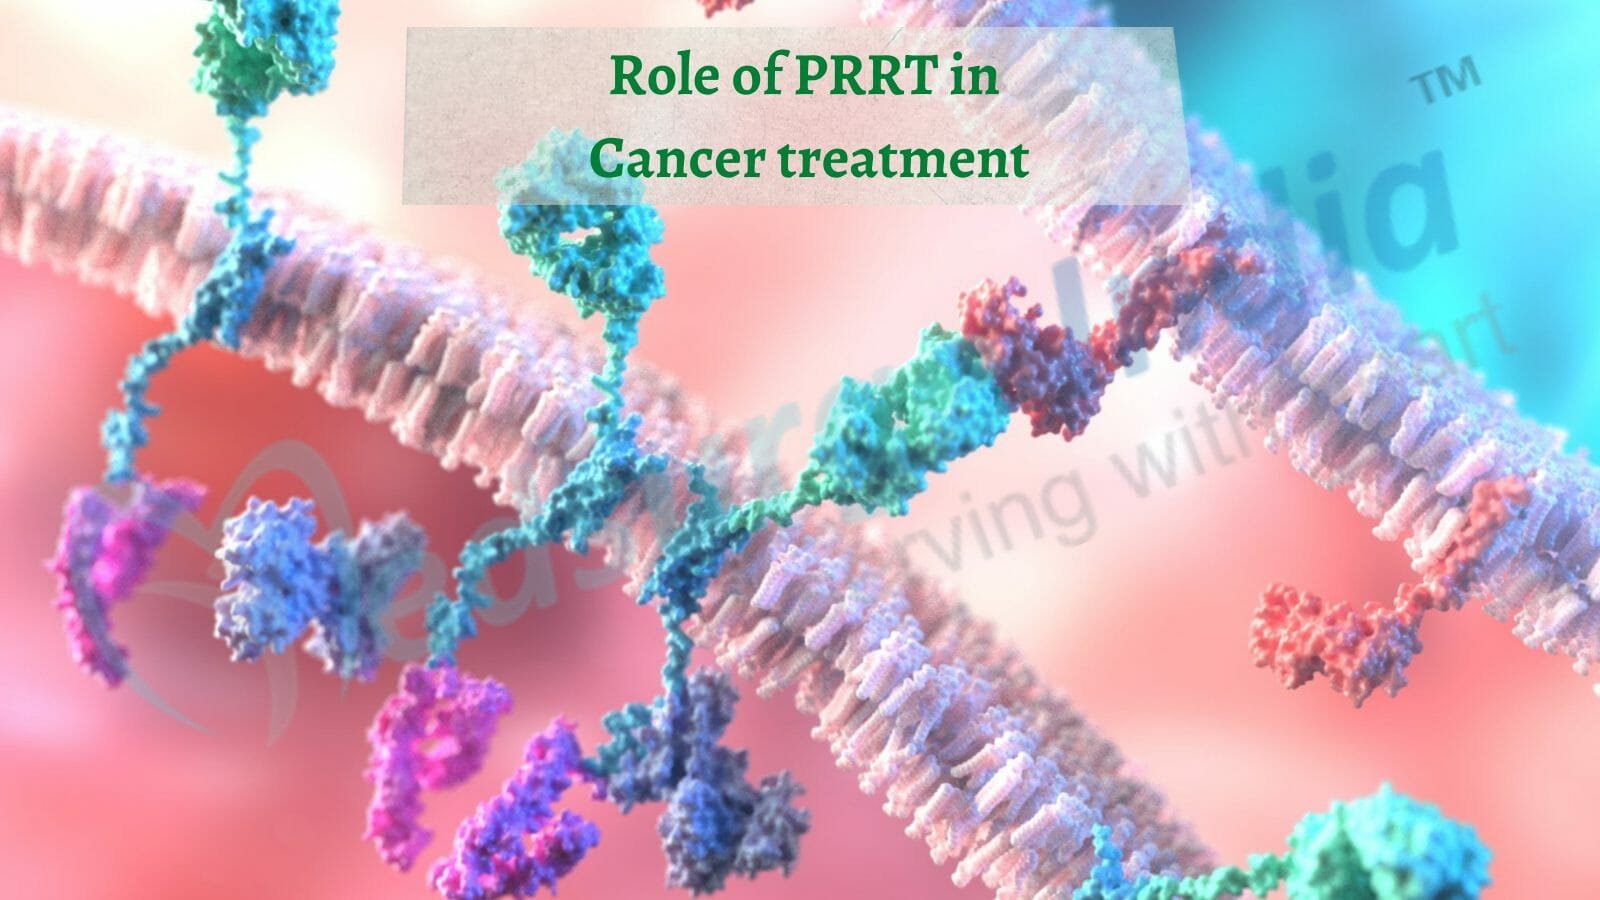 Role of PRRT Therapy in Cancer Treatment